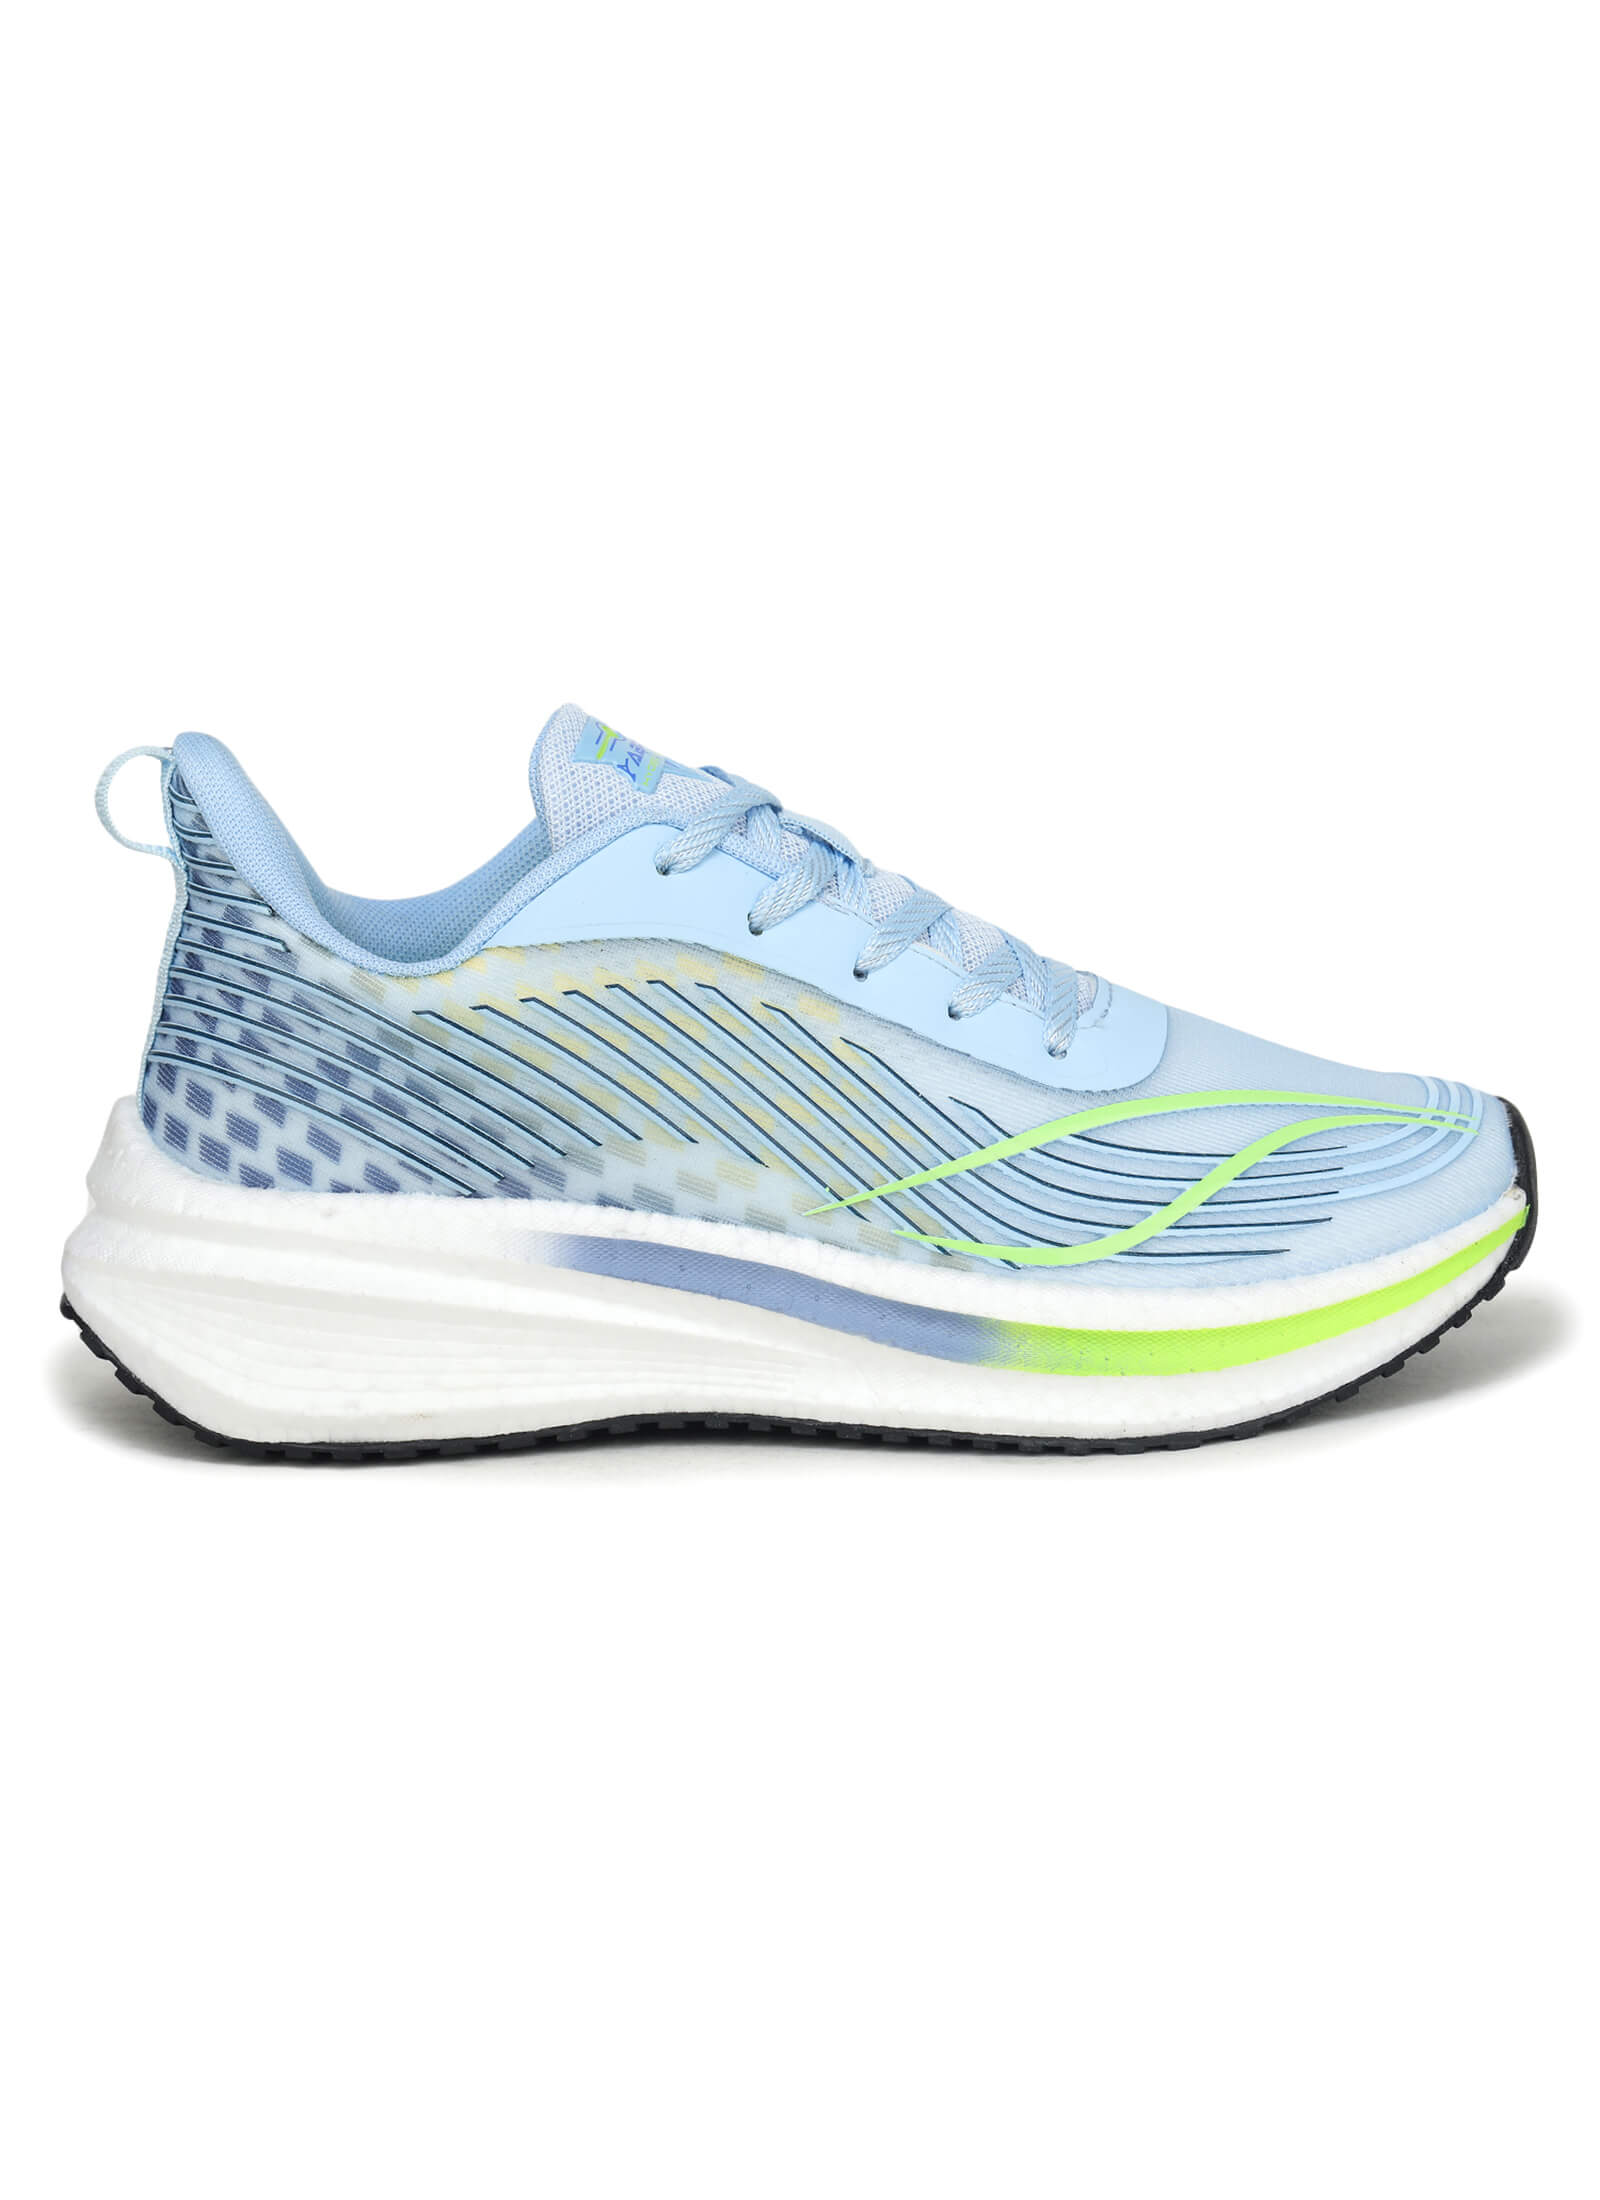 Cliff Hyper Beads Sports Shoes for Men